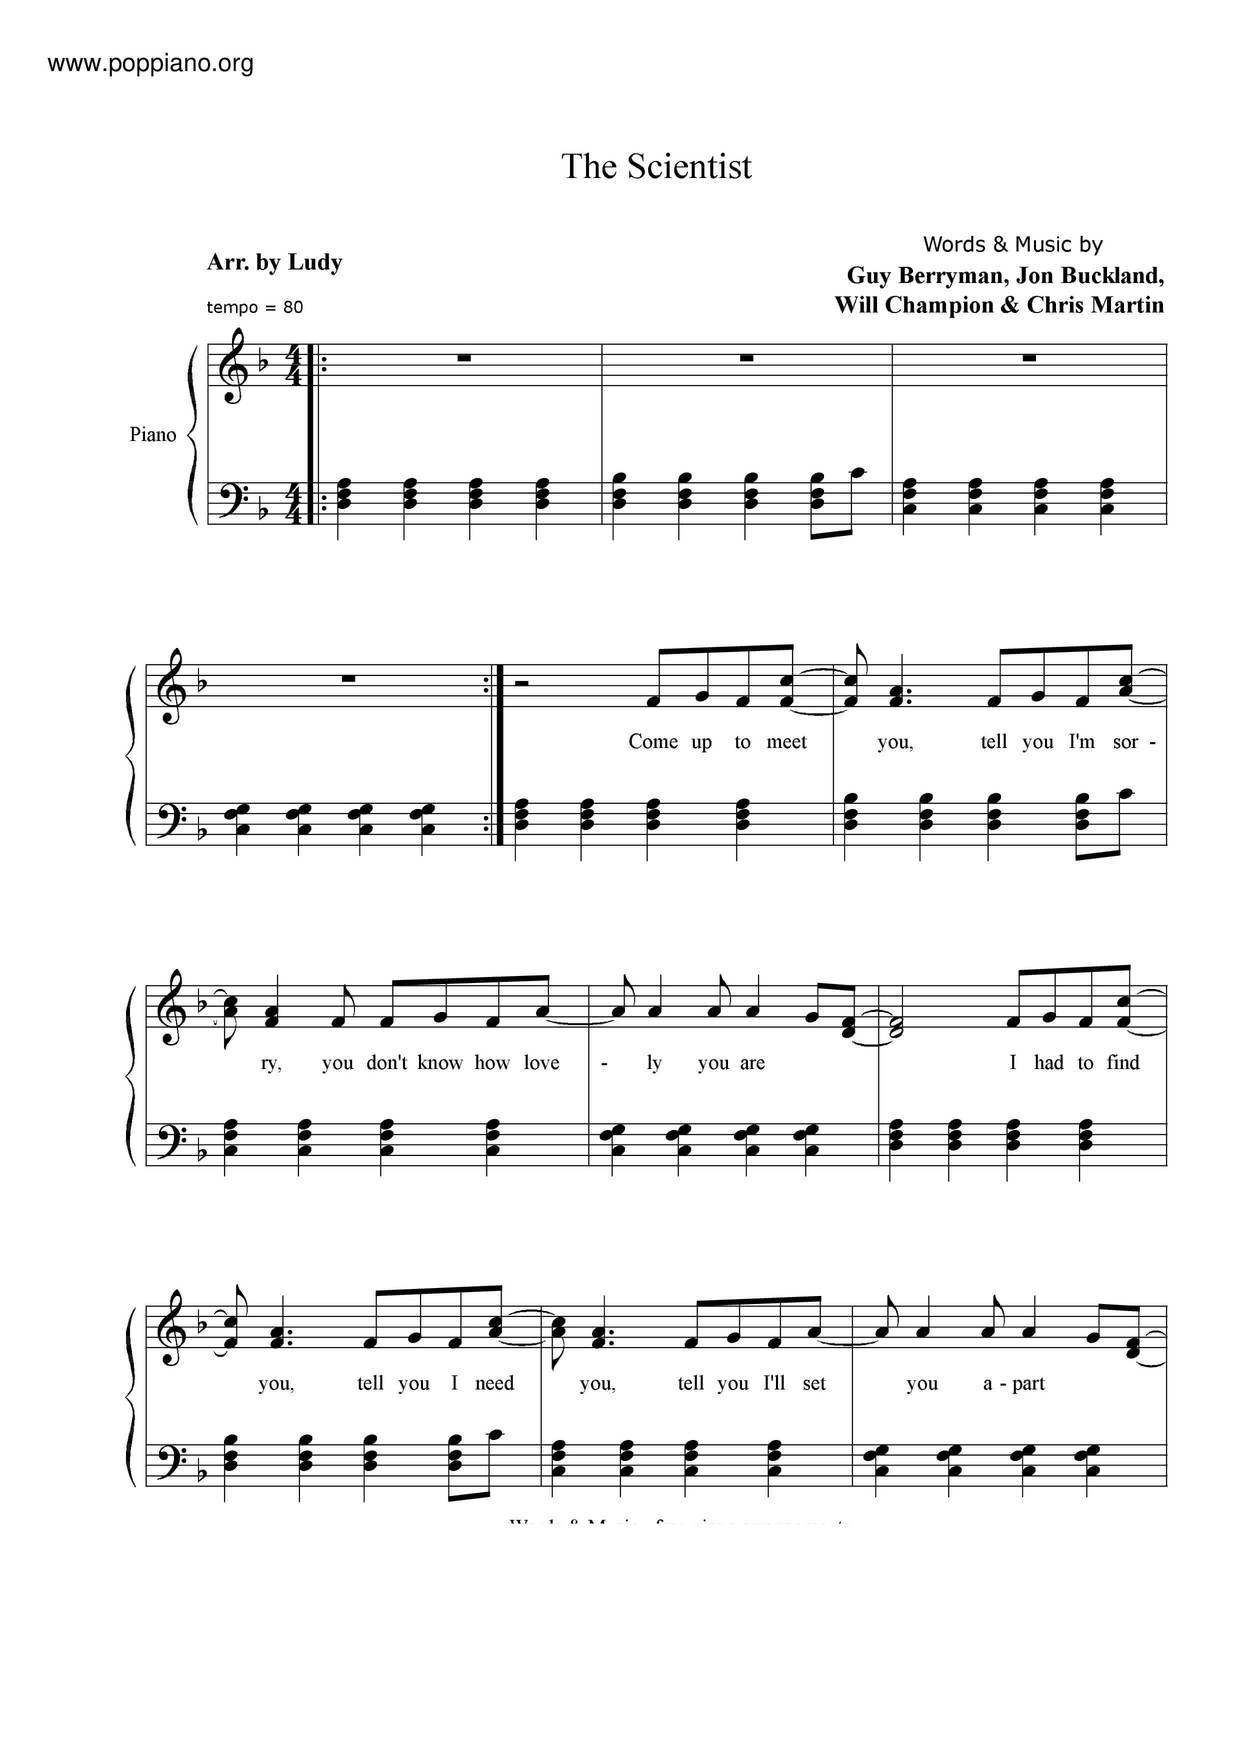 Coldplay-The Scientist Sheet Music pdf, - Free Score Download ★